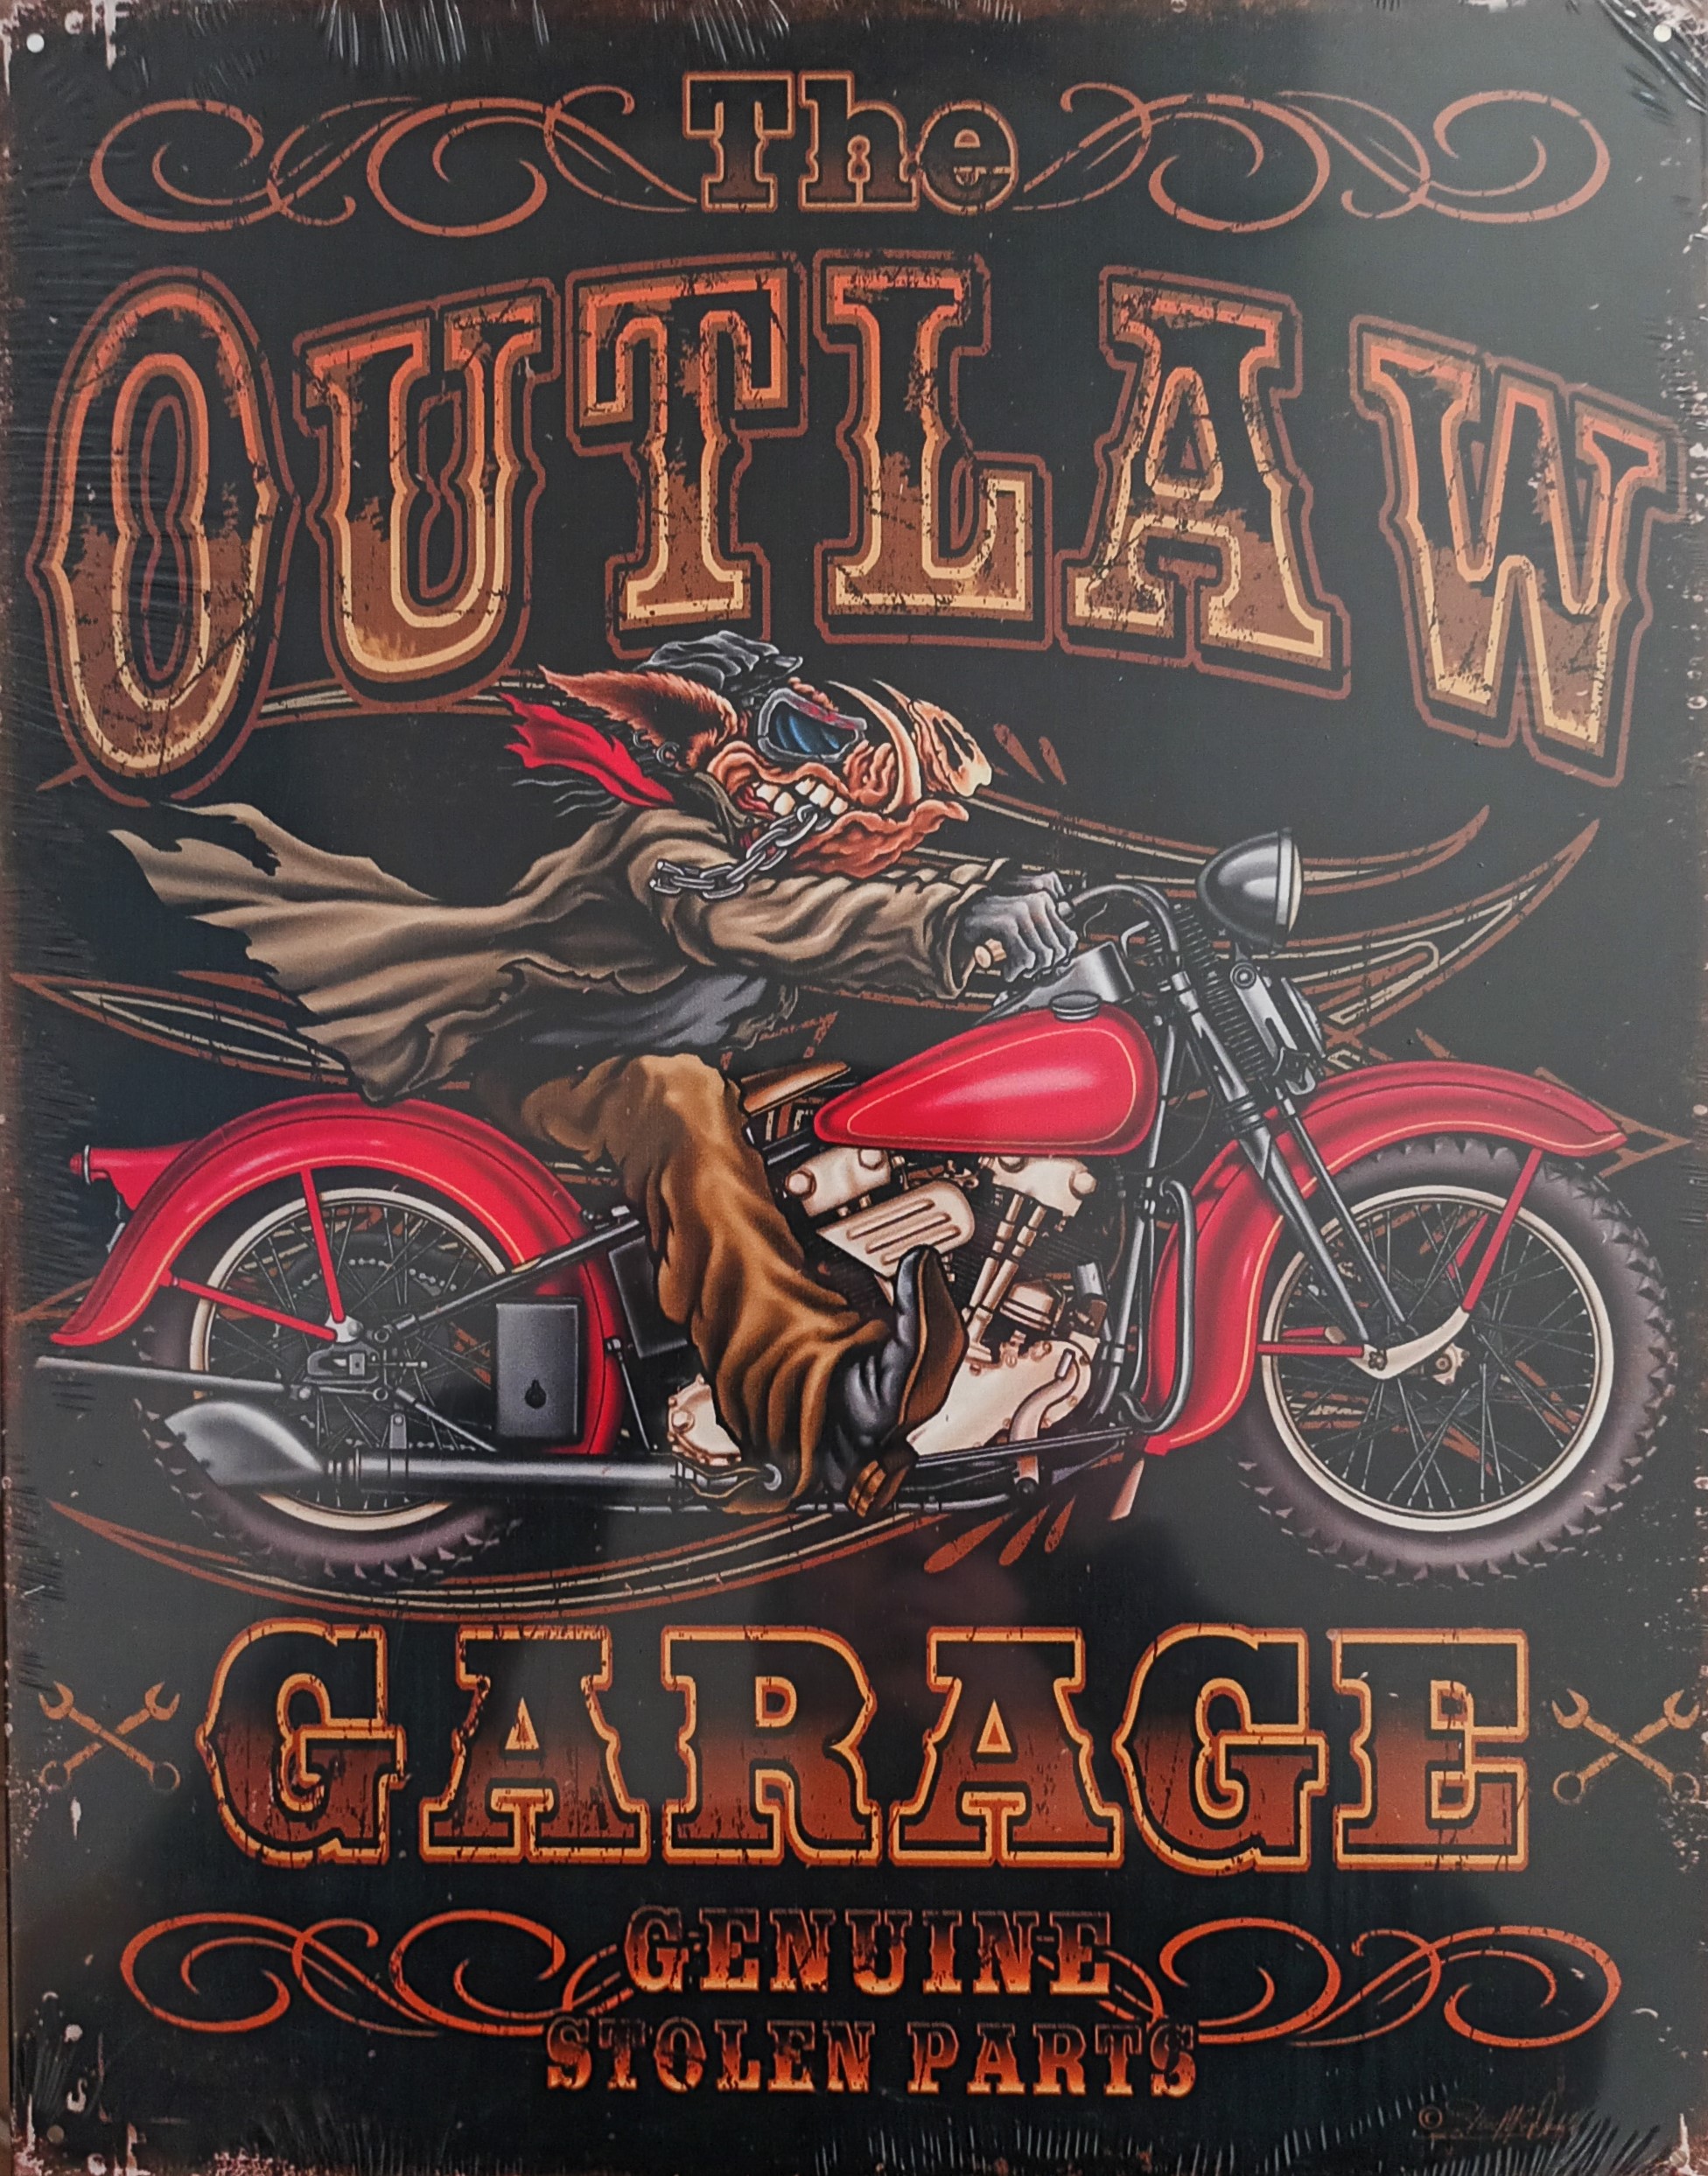 plaque metal americaine the outlaw garage